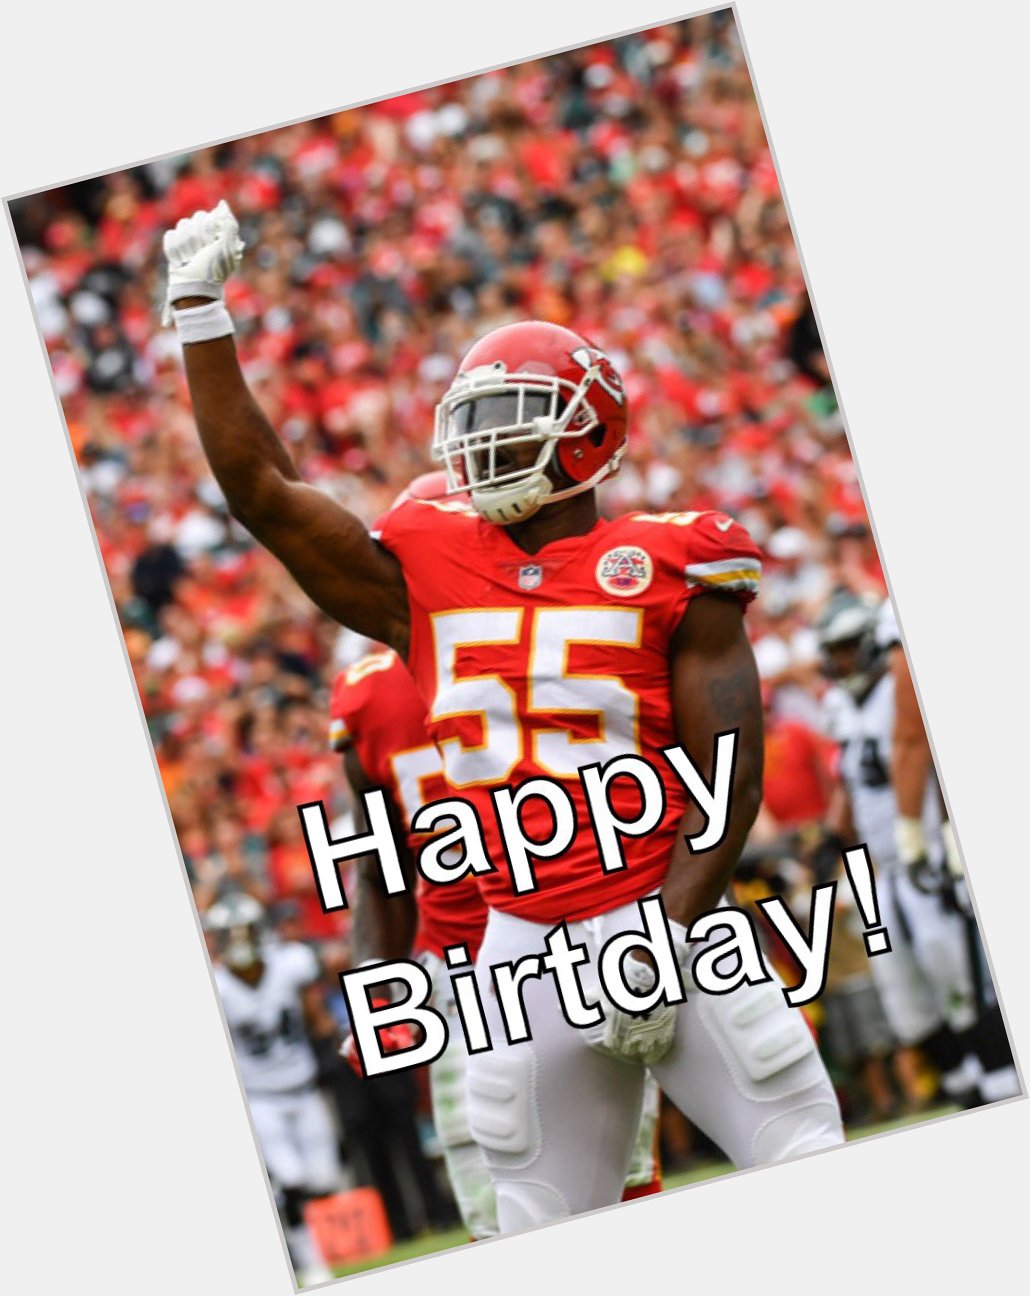 Happy Birthday to # 55 Dee Ford!   